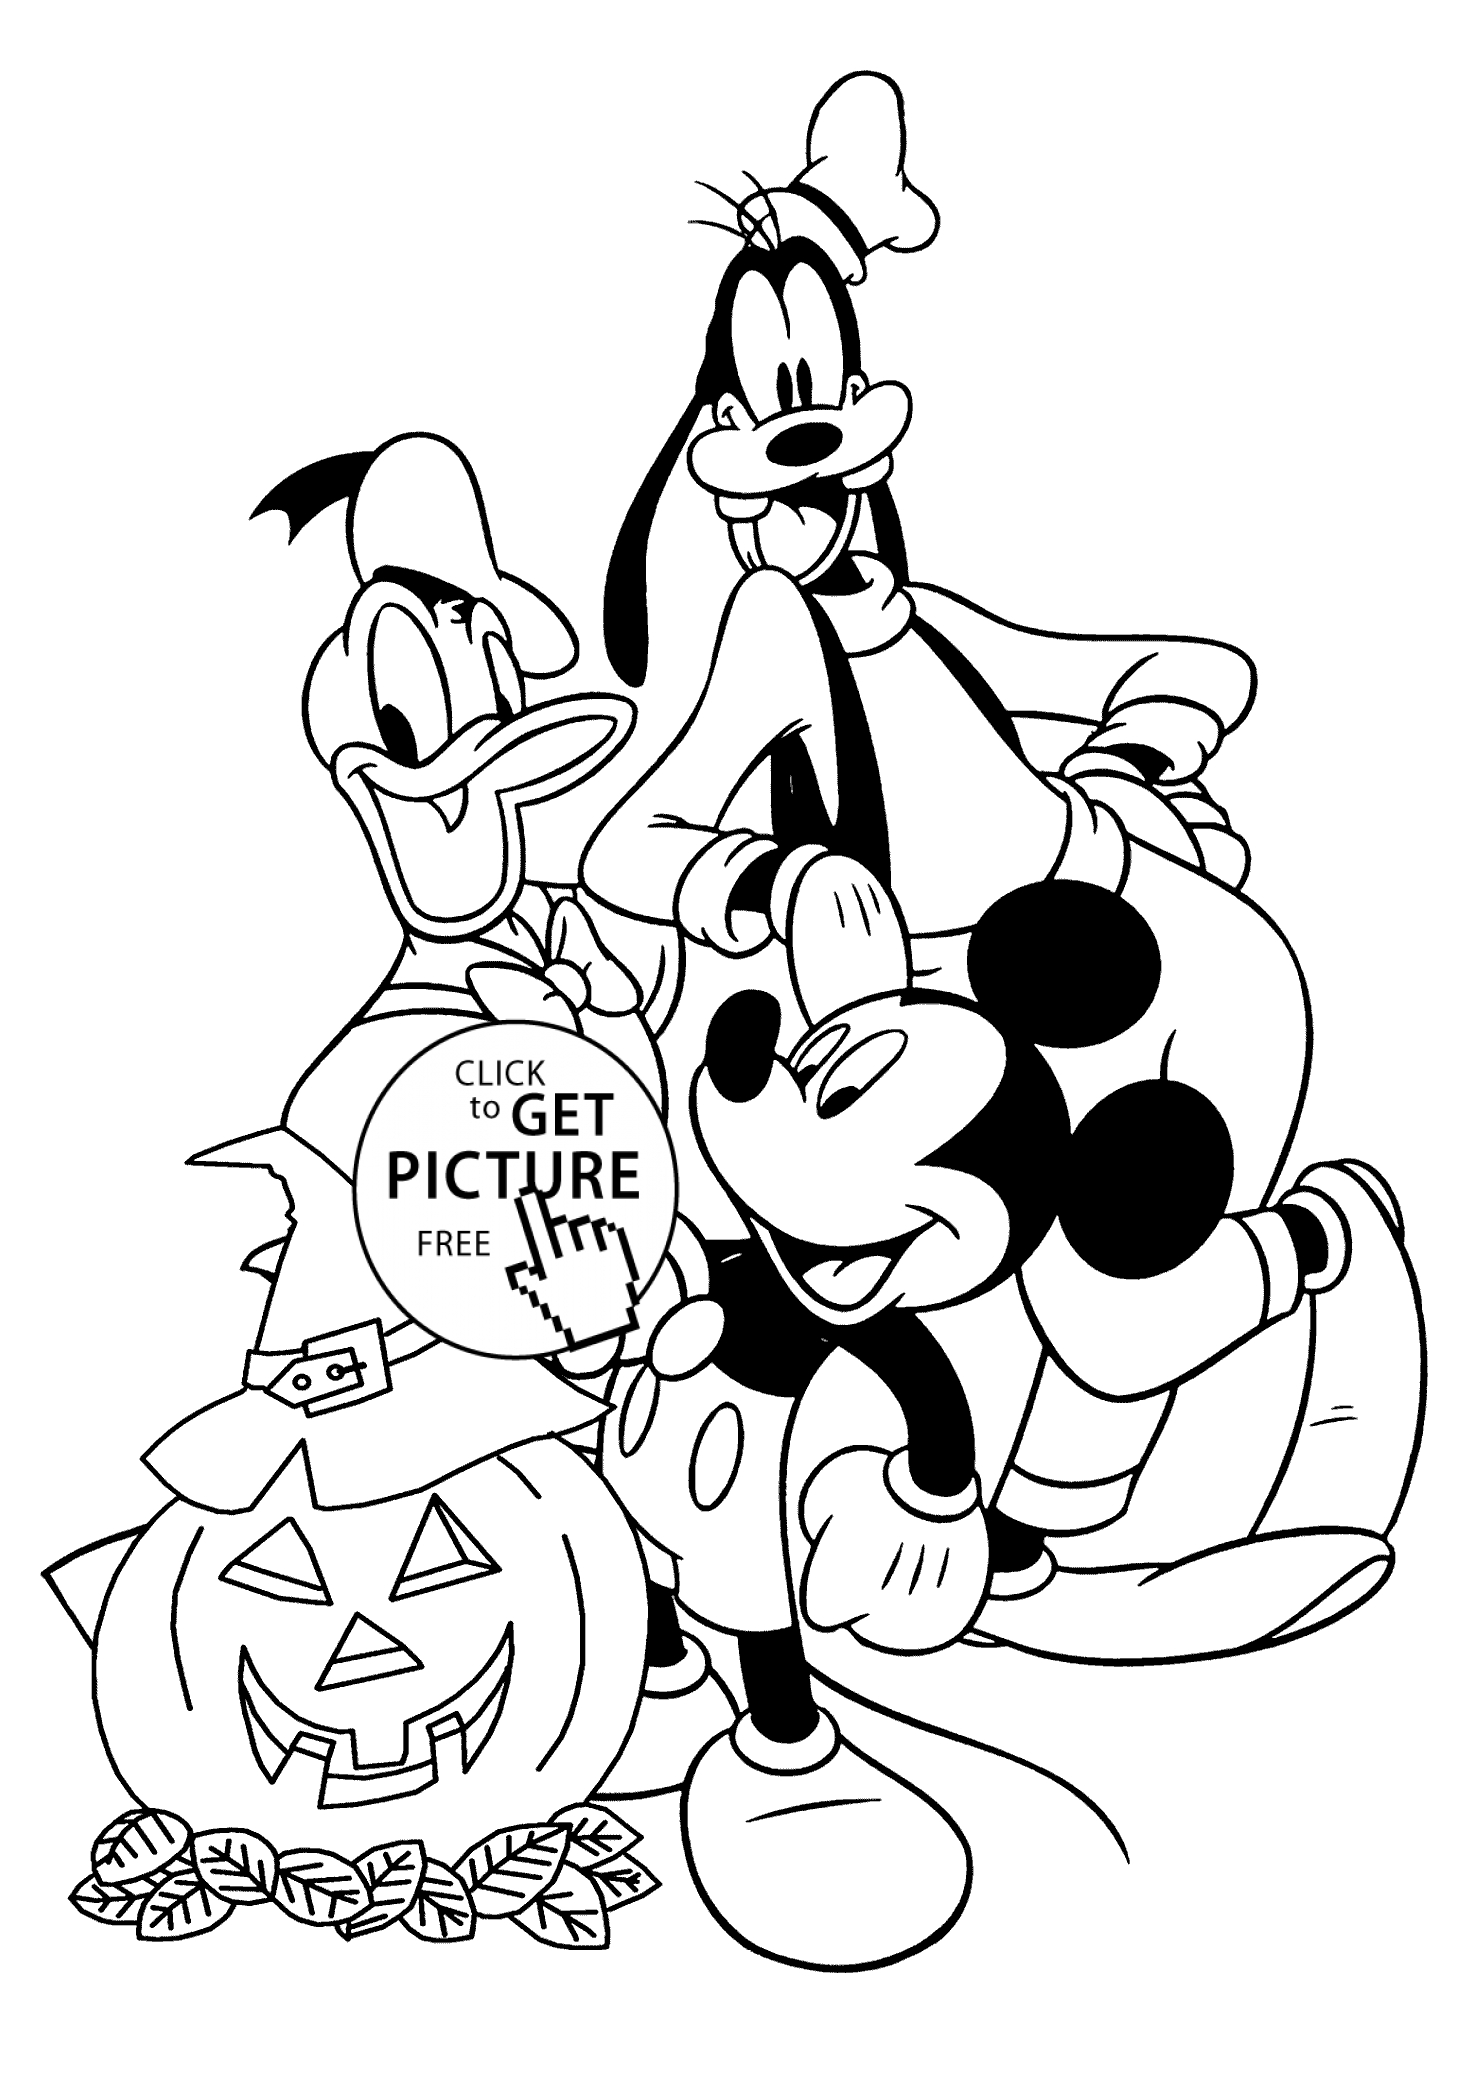 Happy Jack O Lantern Coloring Pages Halloween Disney Characters Coloring Page For Kids Printable Free